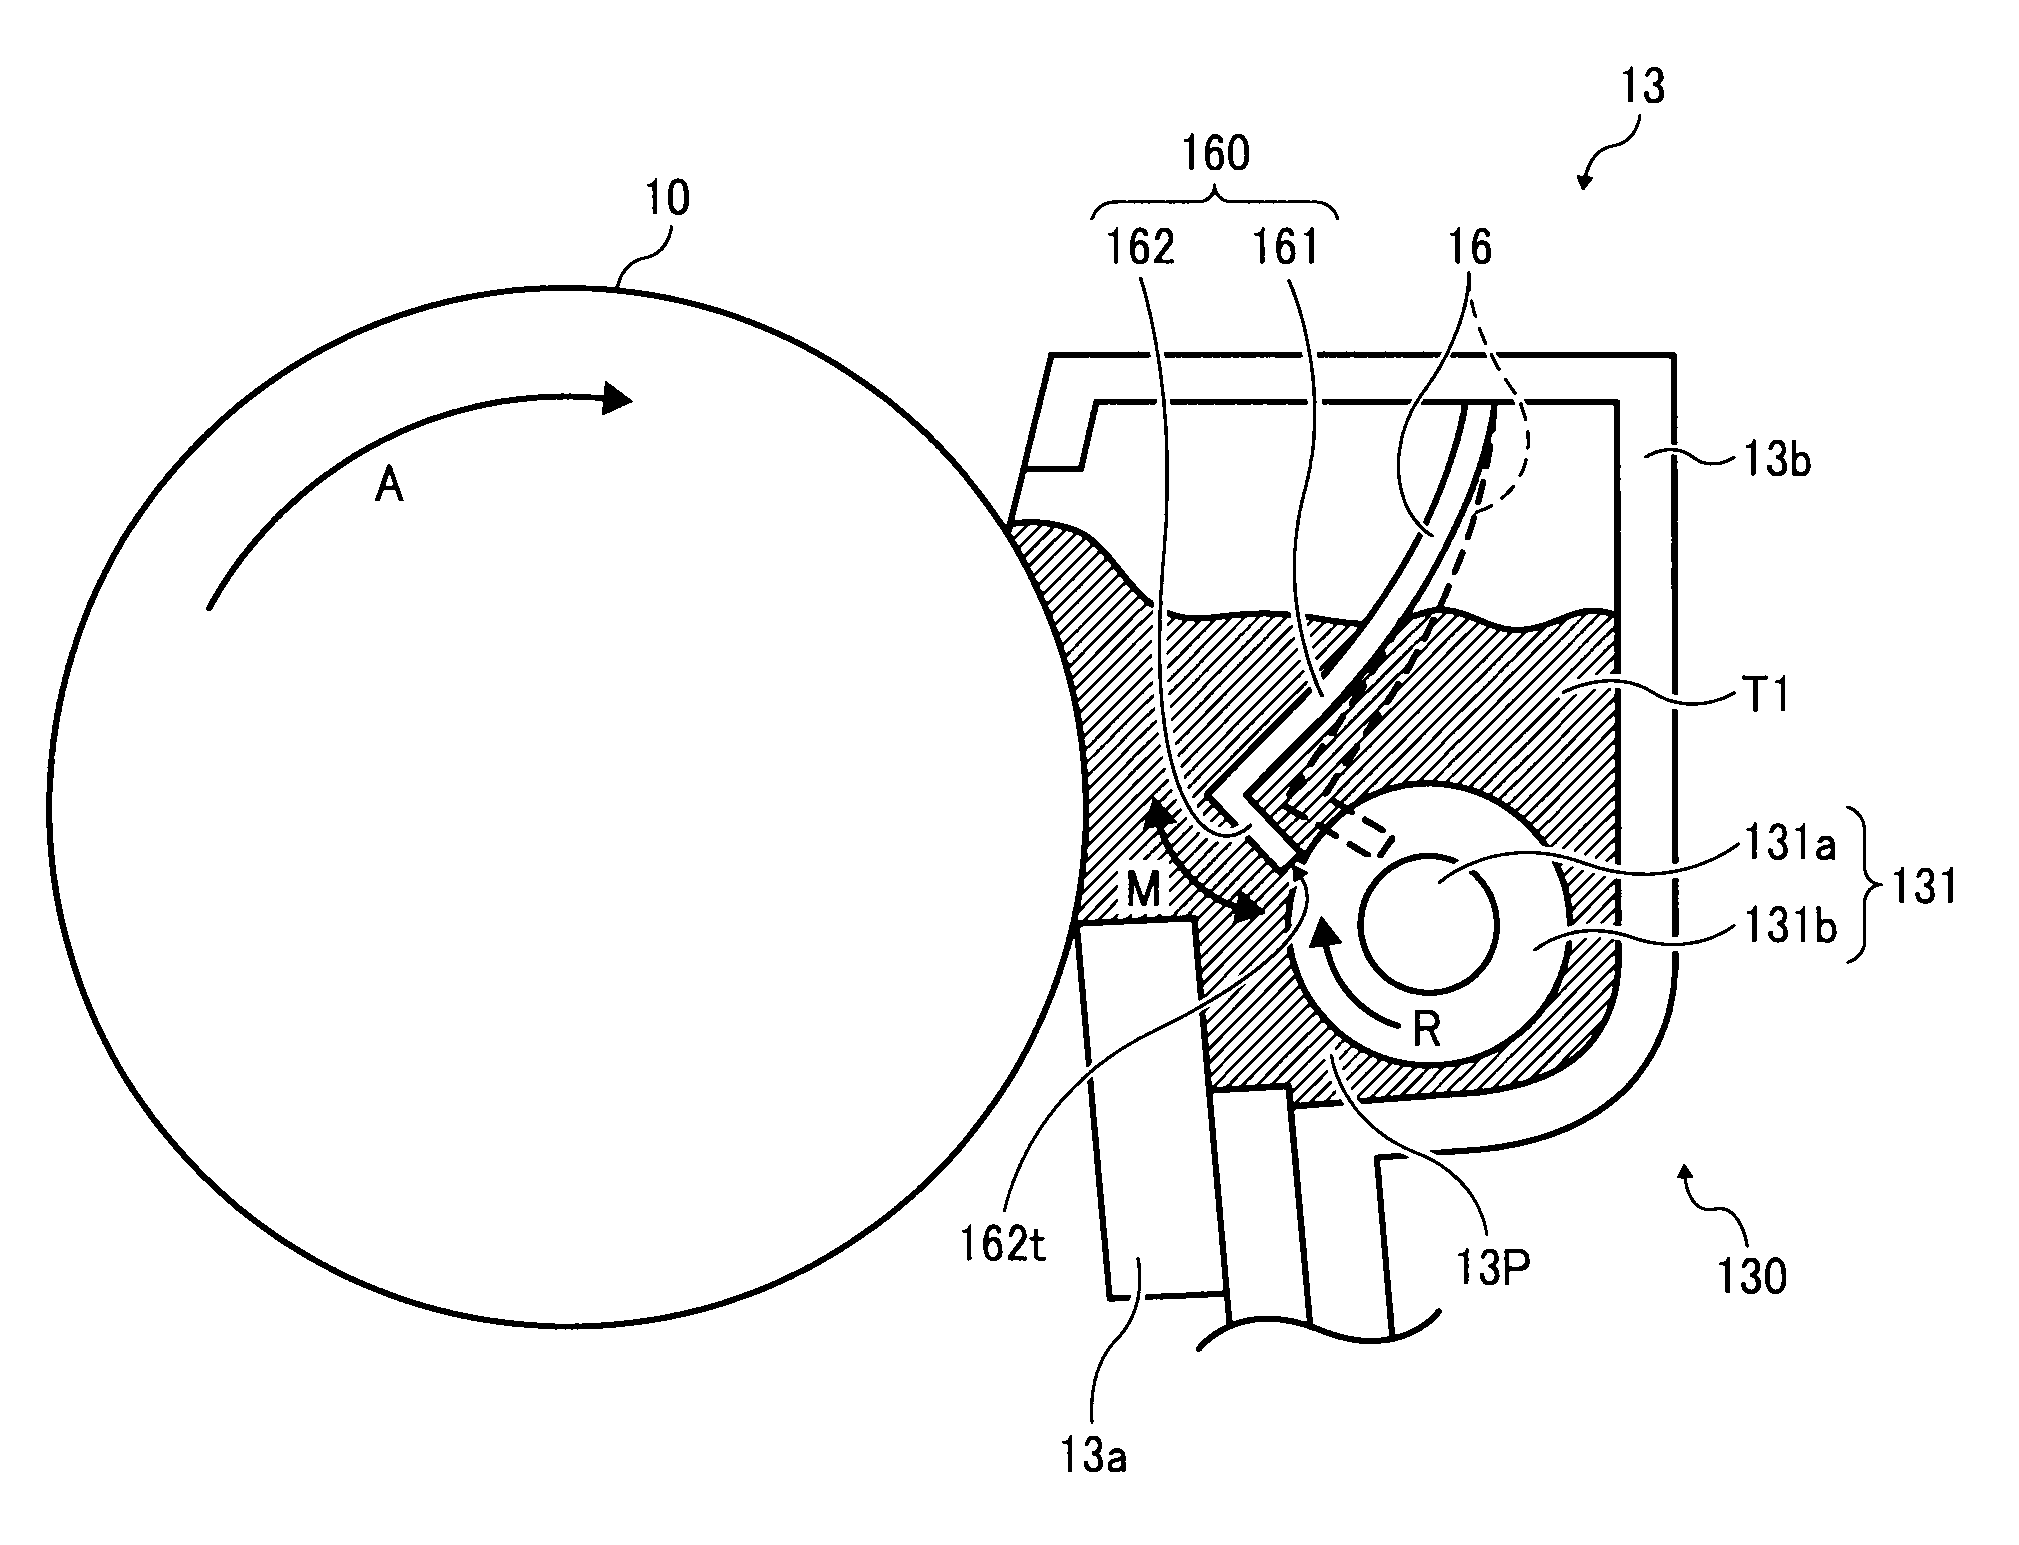 Toner conveyance device and image forming apparatus incorporating same